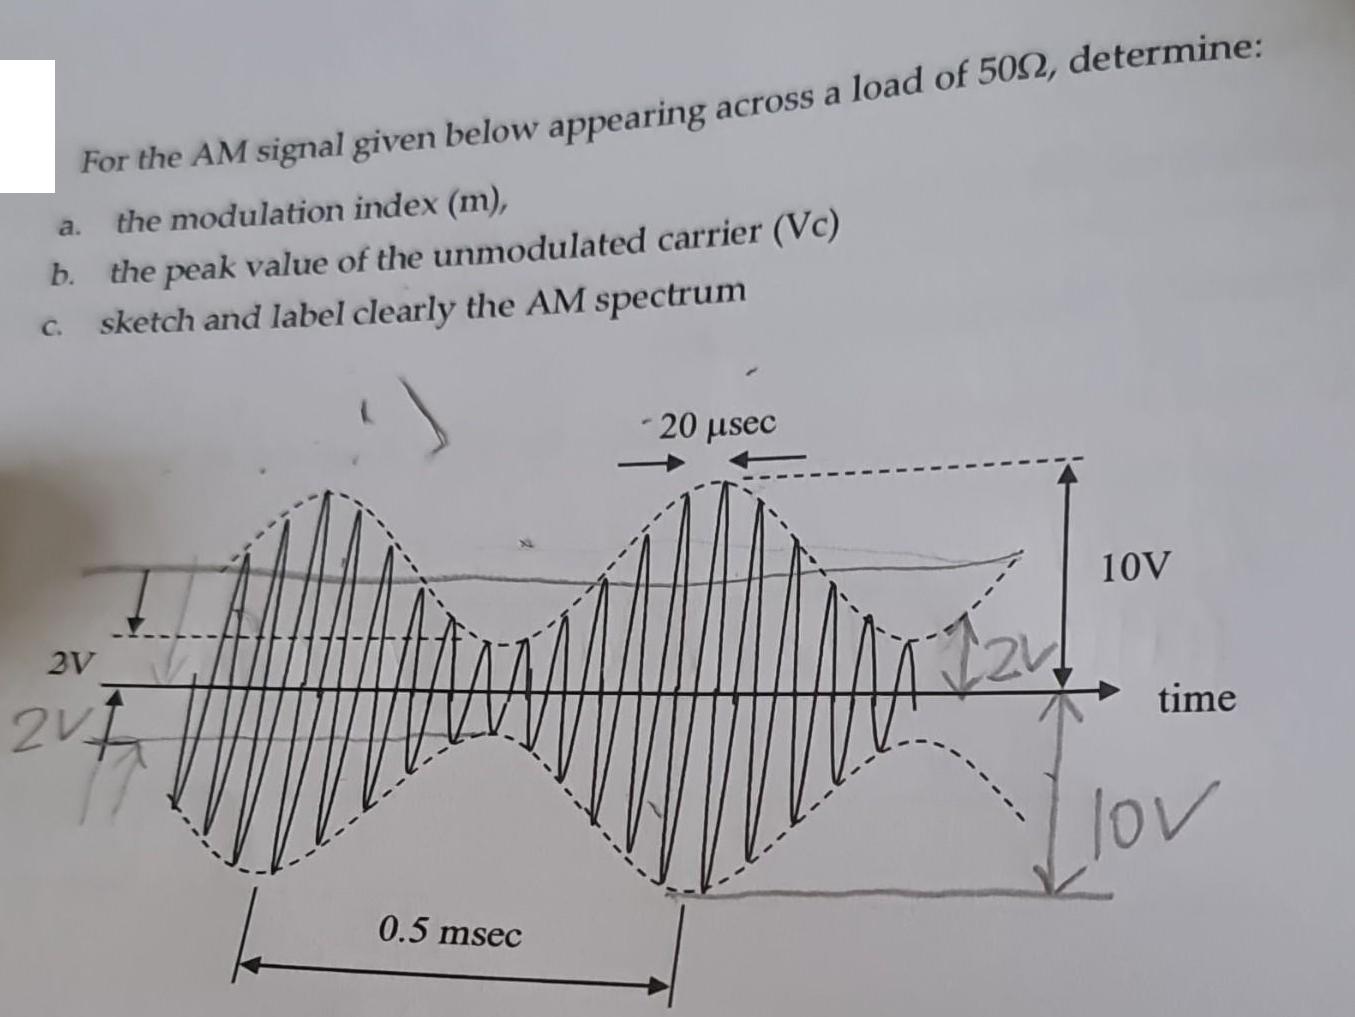 a. b. For the AM signal given below appearing across a load of 502, determine: the modulation index (m), the